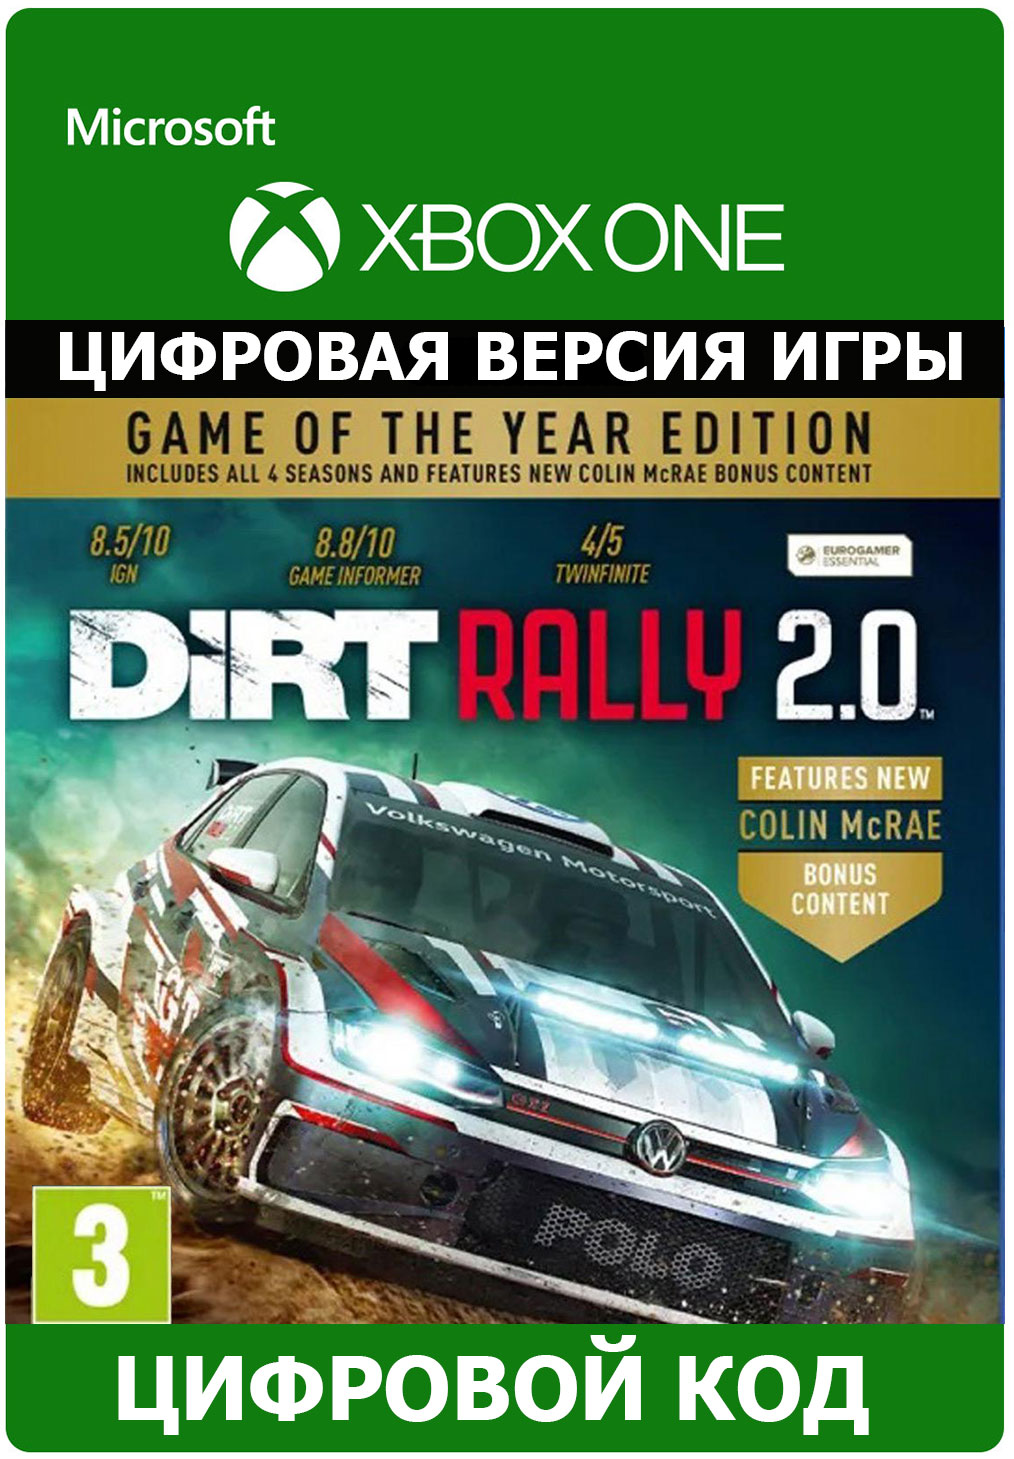 DiRT Rally 2.0 - Game of the Year Edition XBOX ONE ключ